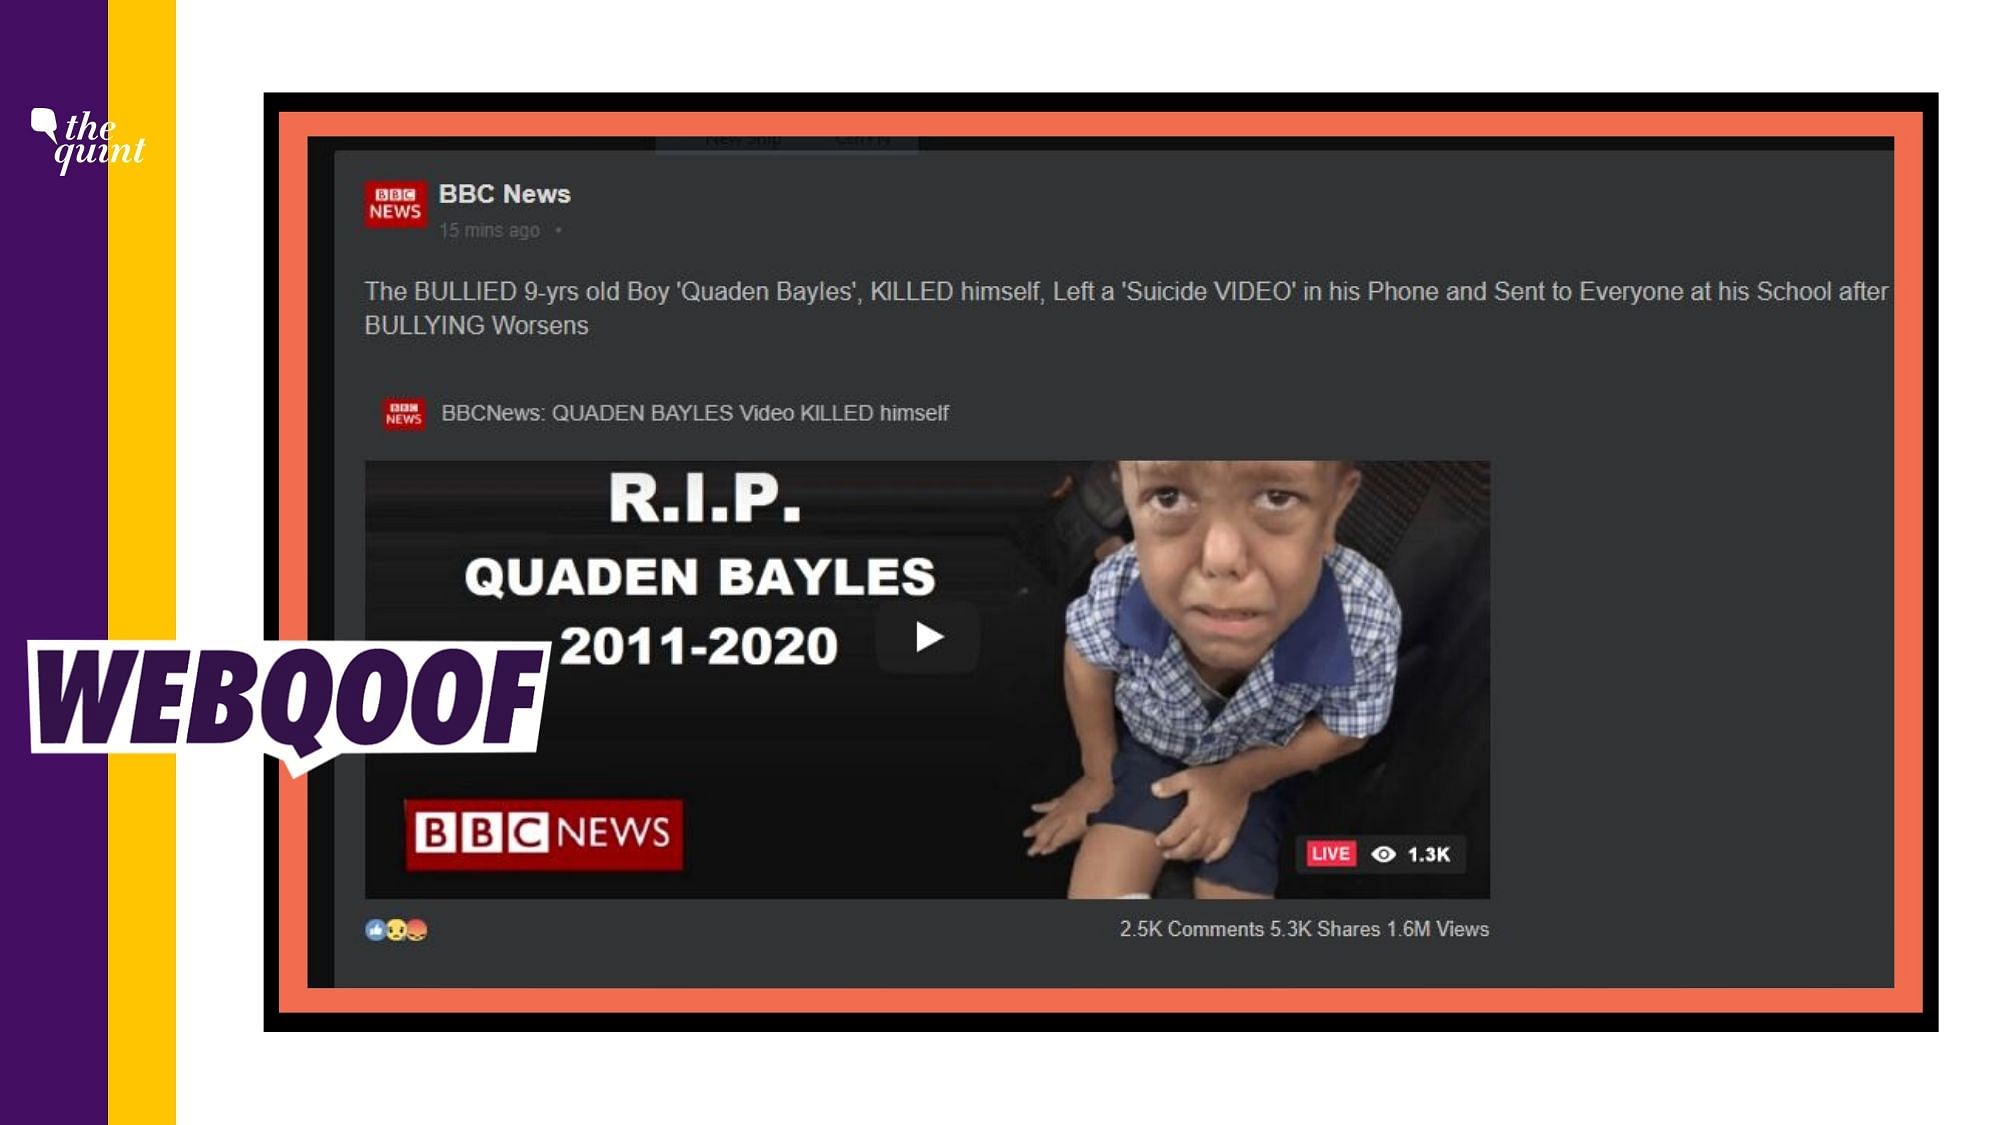 A purported video ‘from BBC’ claims that bullied boy Quaden Bayles killed self after bullying at school worsened.